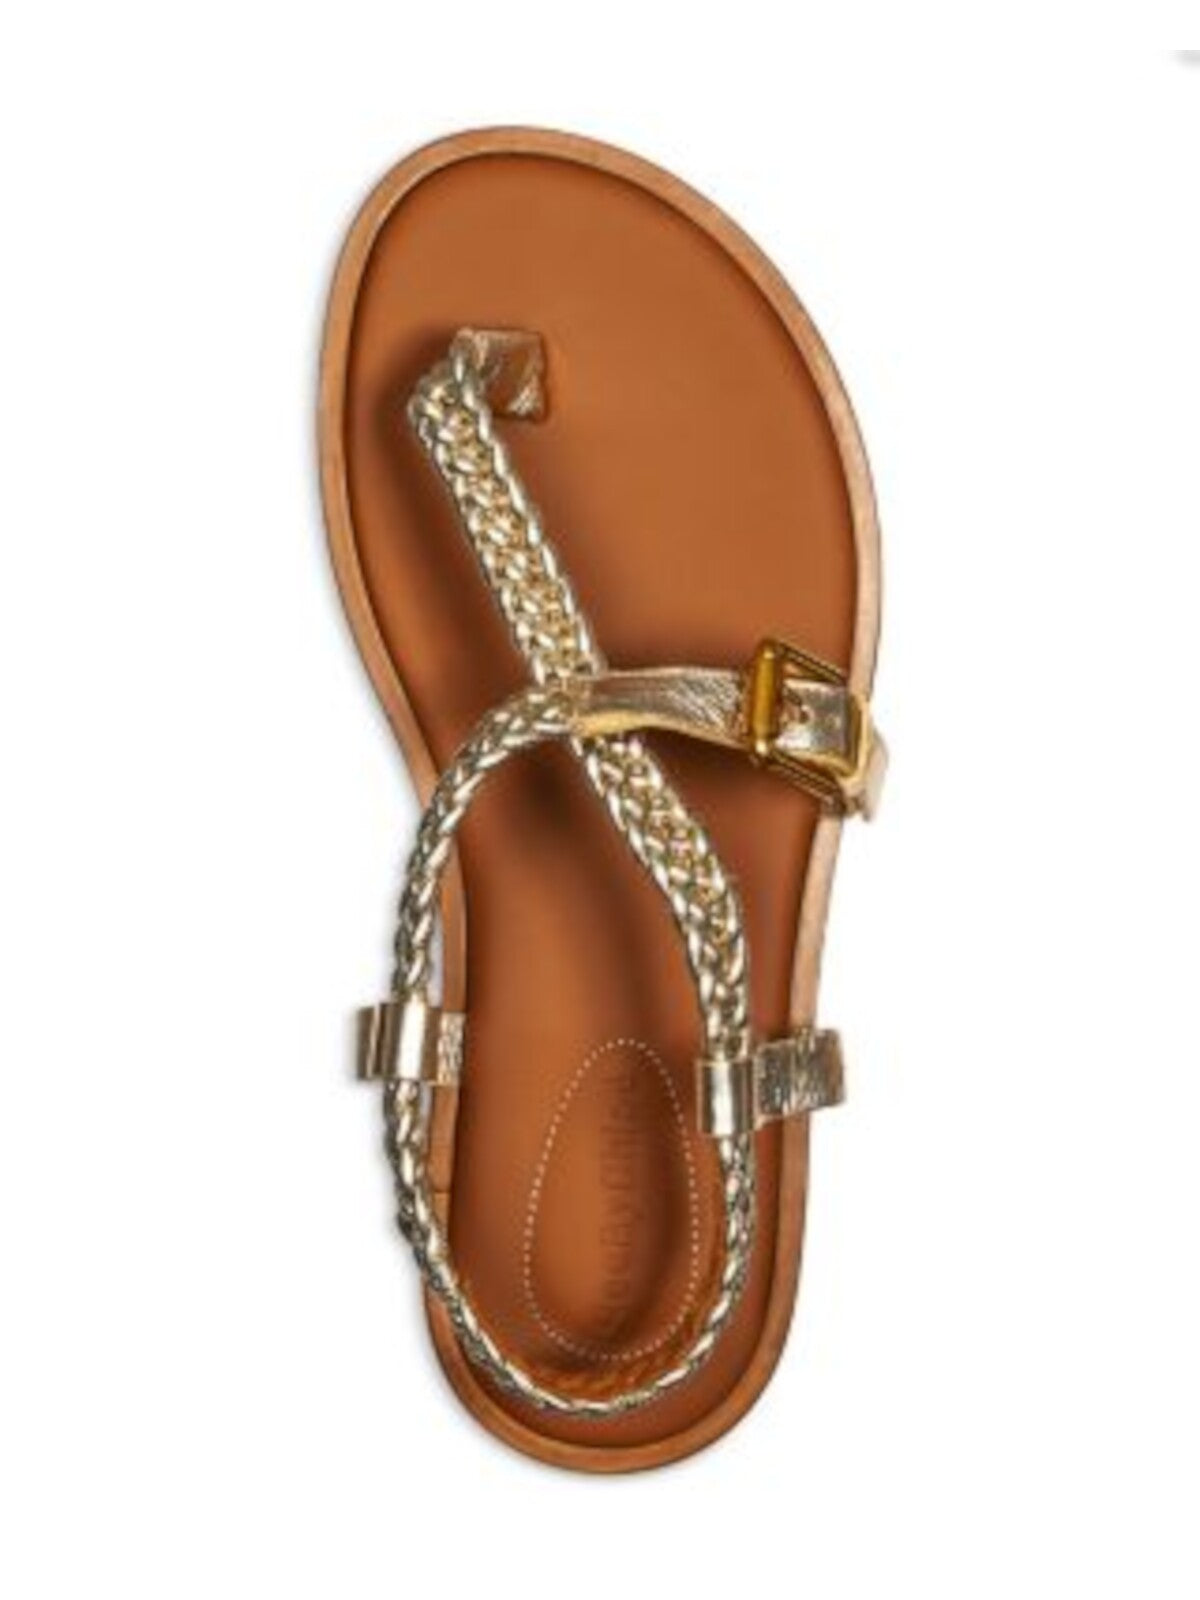 SEE BY CHLOE Womens Gold Metalic Braided Padded Nola Round Toe Buckle Thong Sandals Shoes 36.5